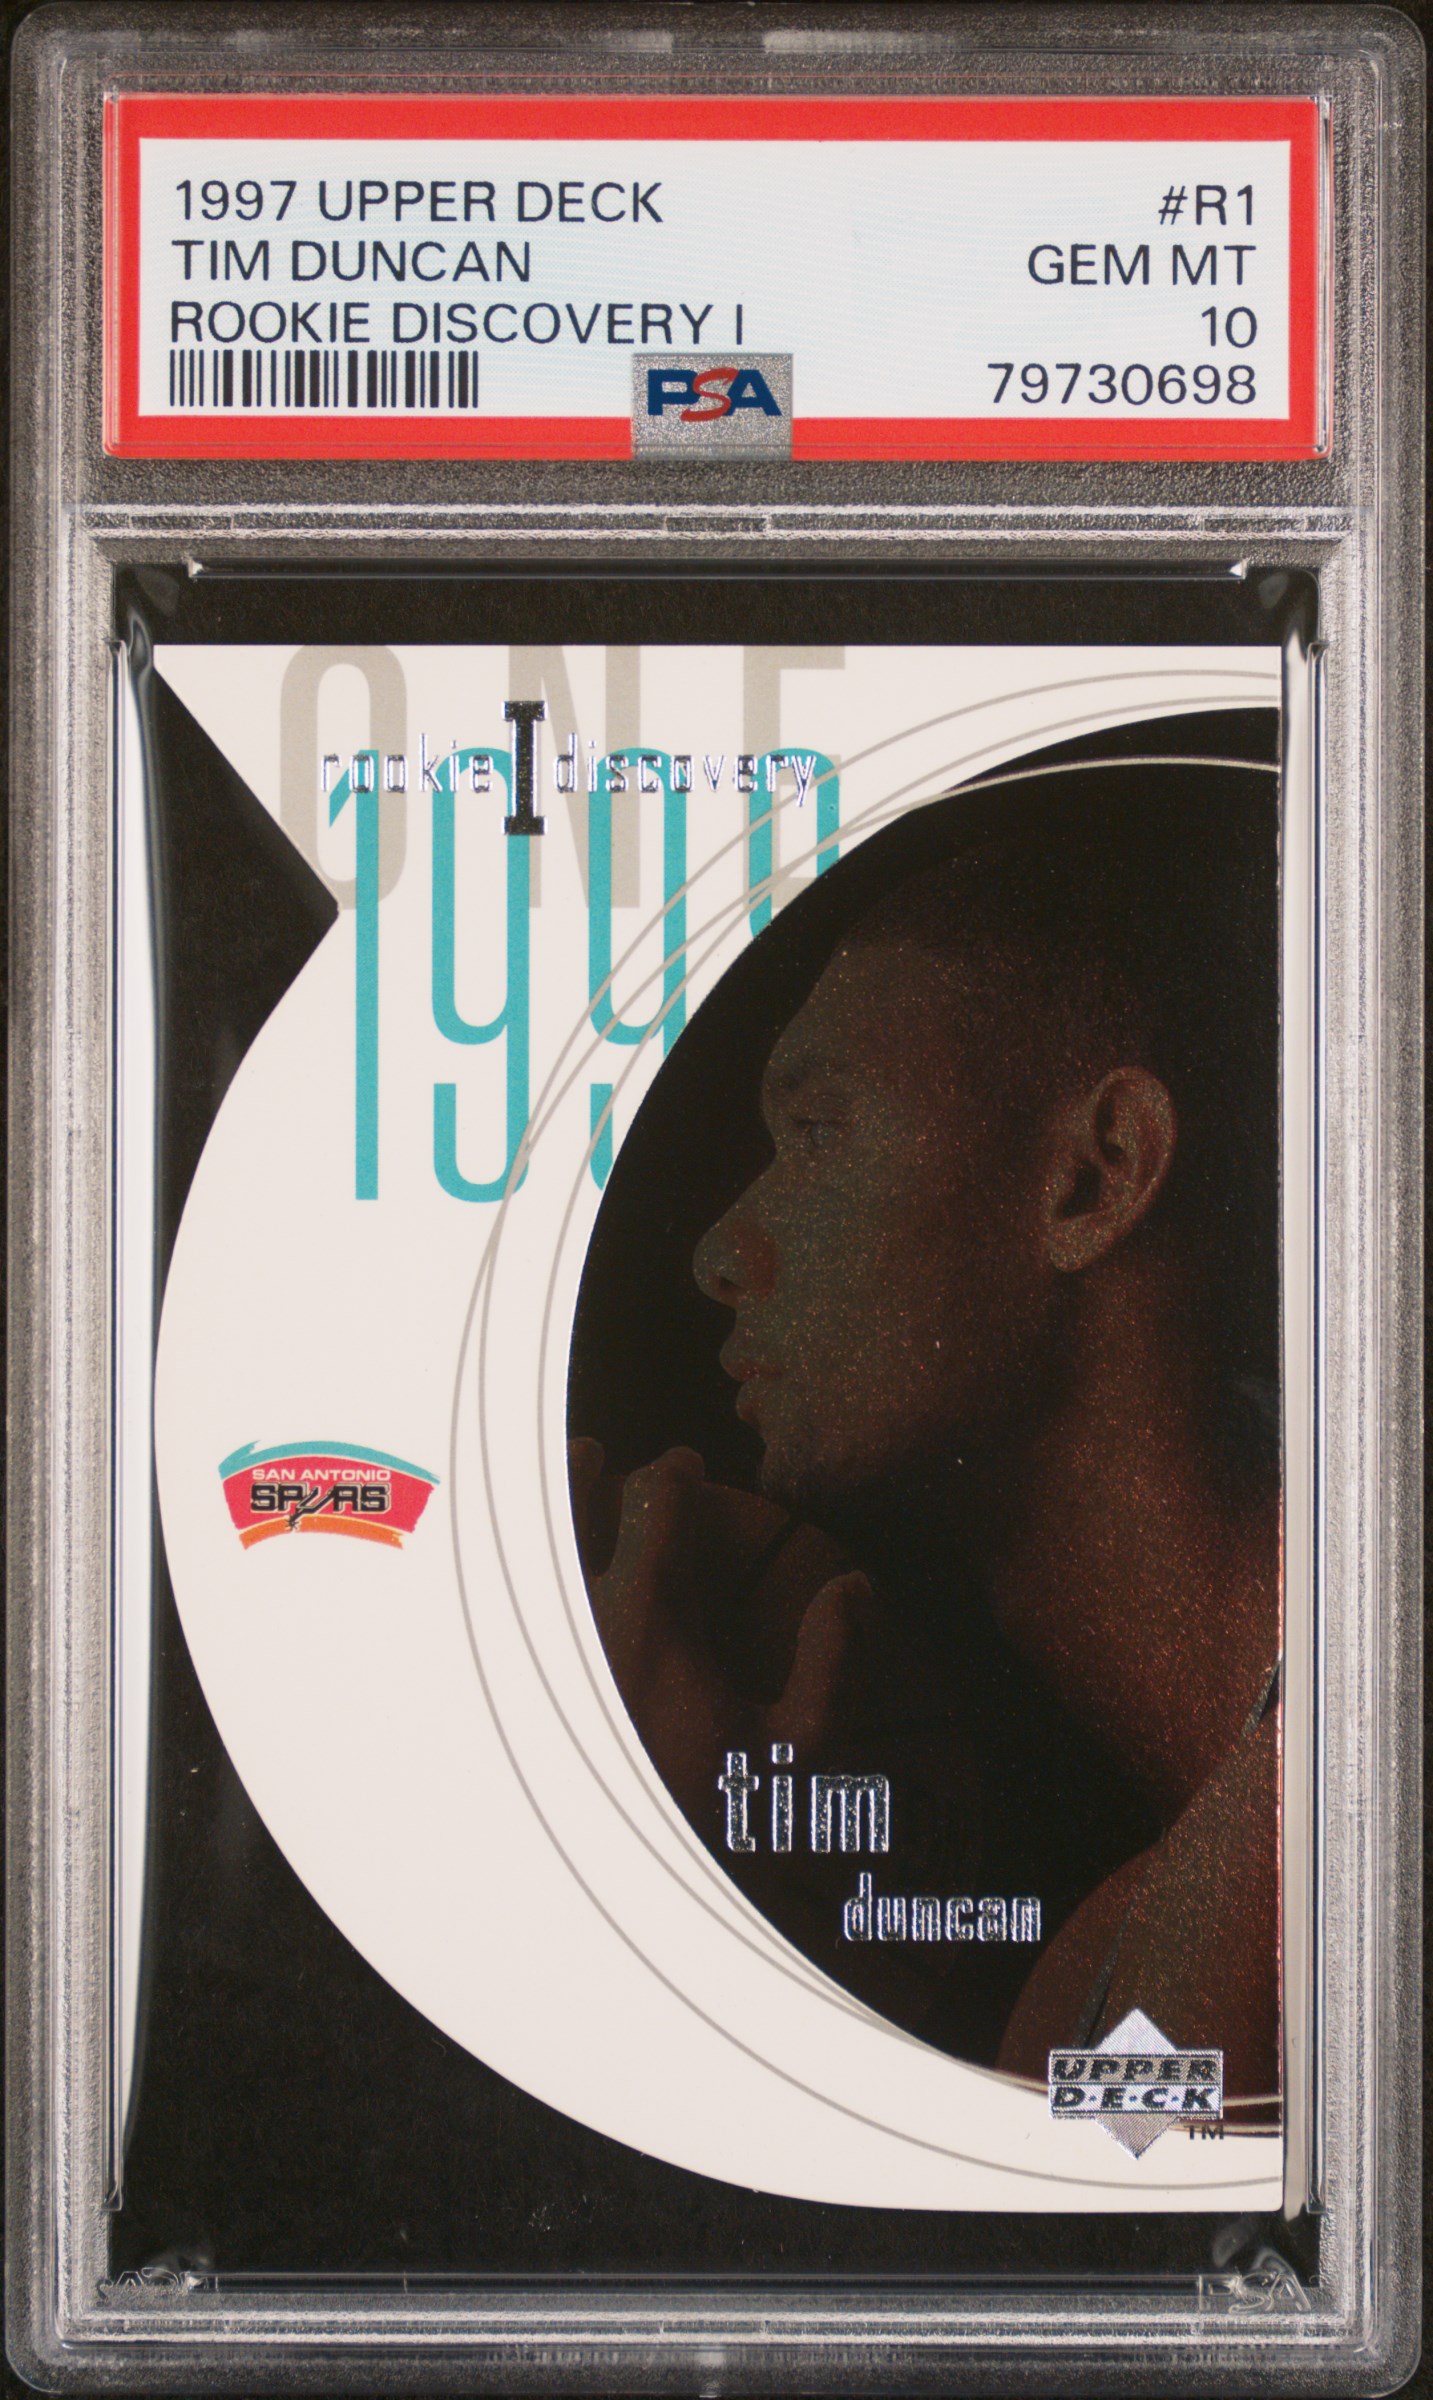 1997 Upper Deck Rookie Discovery Rookie Discovery I #R1 Tim Duncan Rookie Card – PSA GEM MT 10